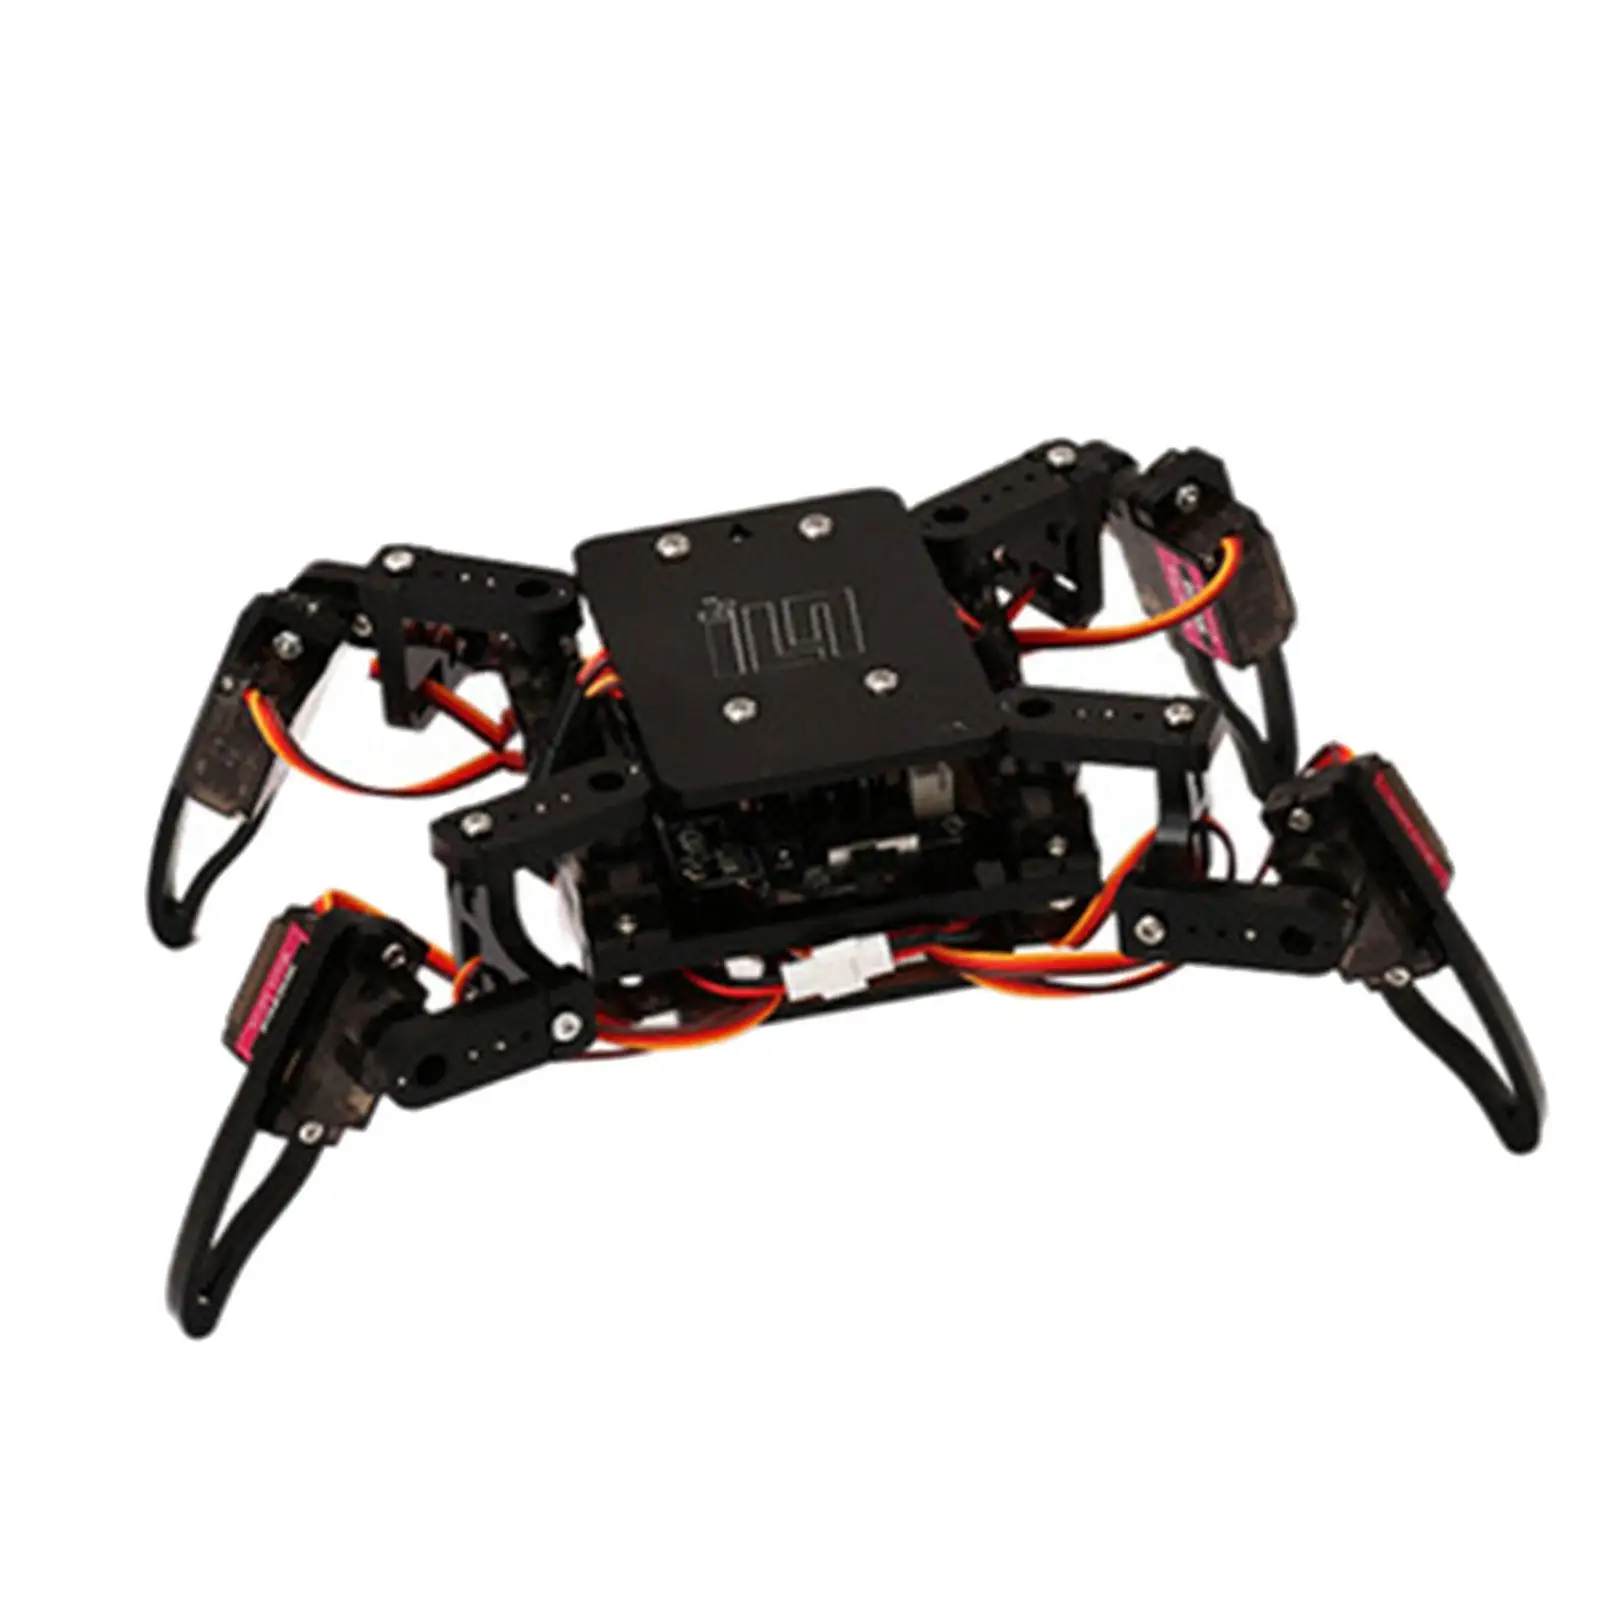 Quadruped Robot Kits Programming Robot Toy Project for Birthday Gifts Adults